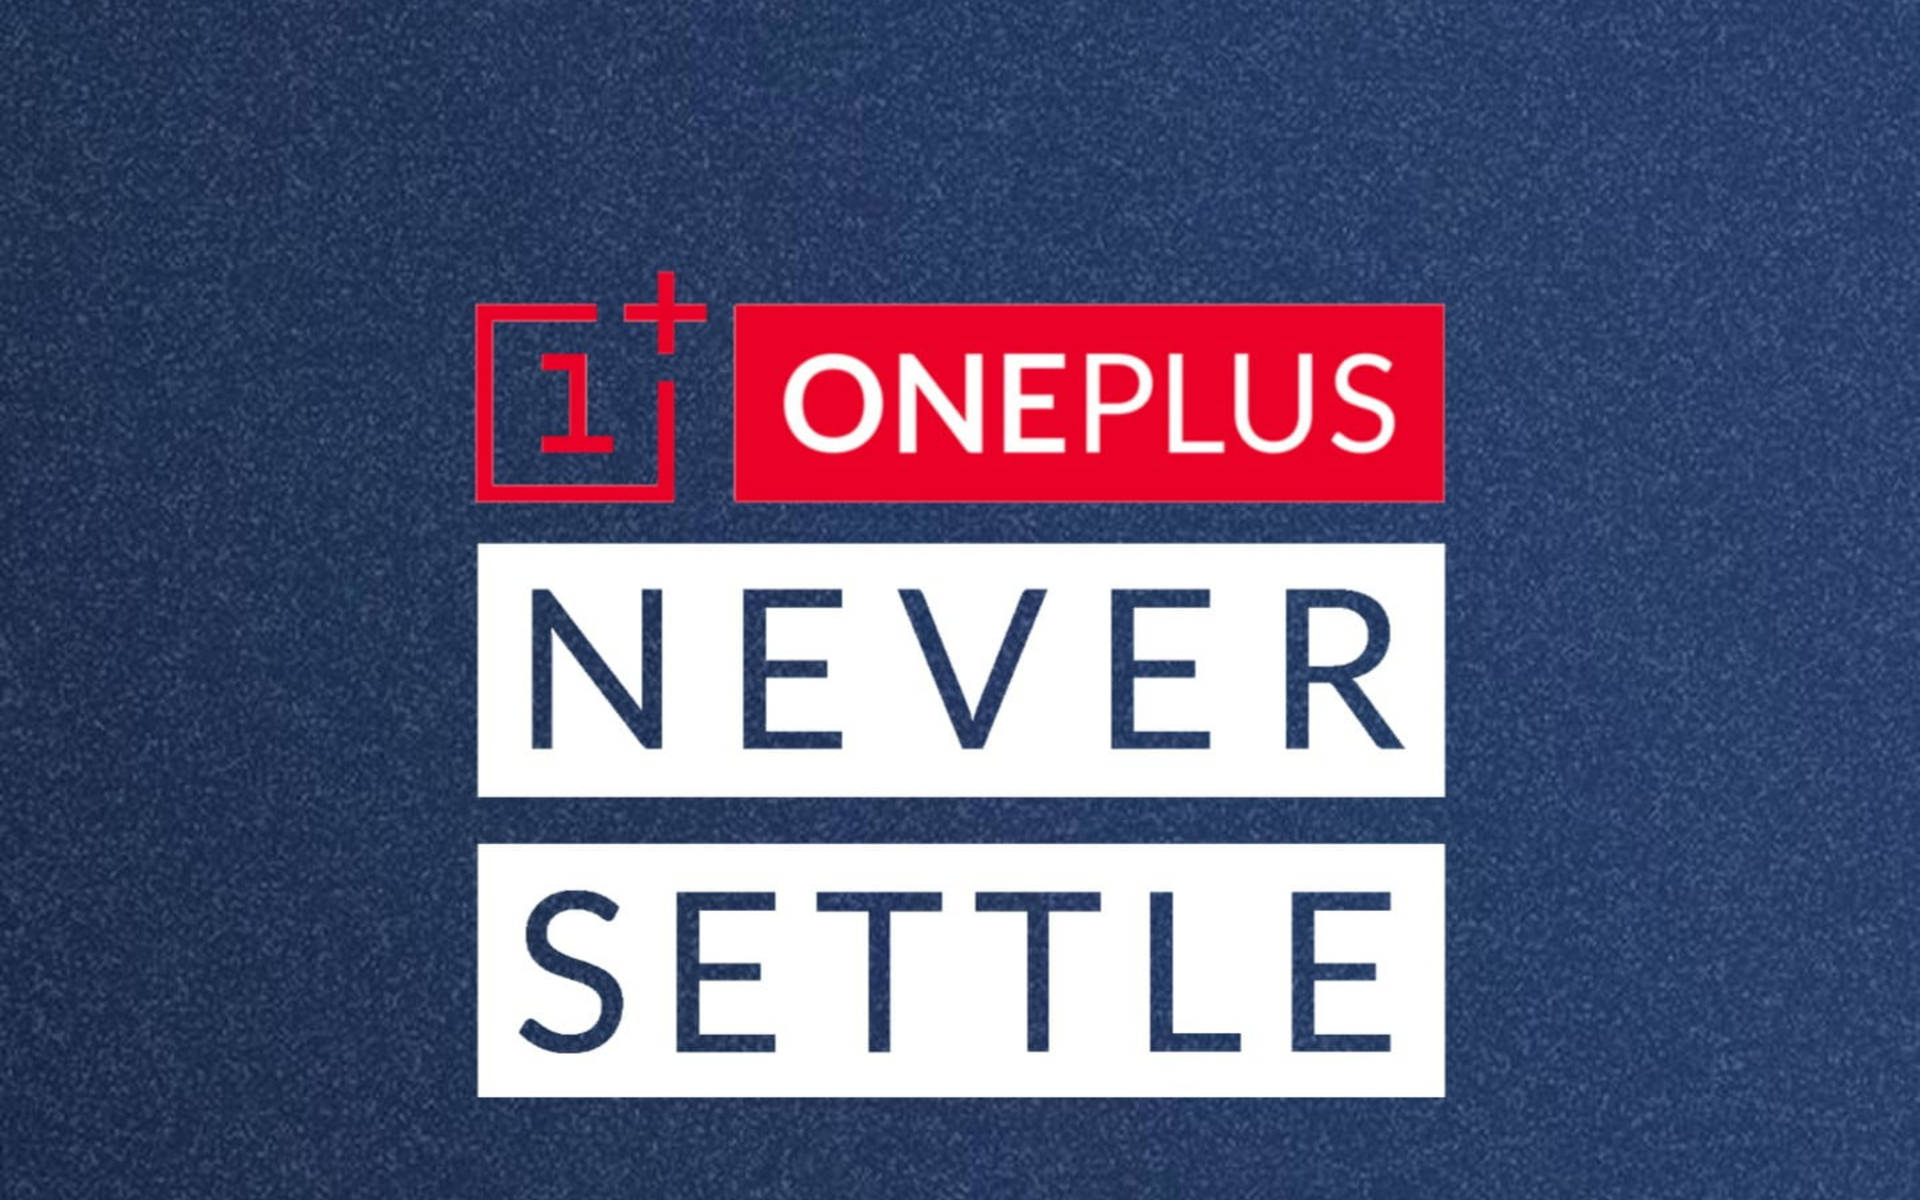 NEVER SETTLE Wallpapers - APK Download for Android | Aptoide